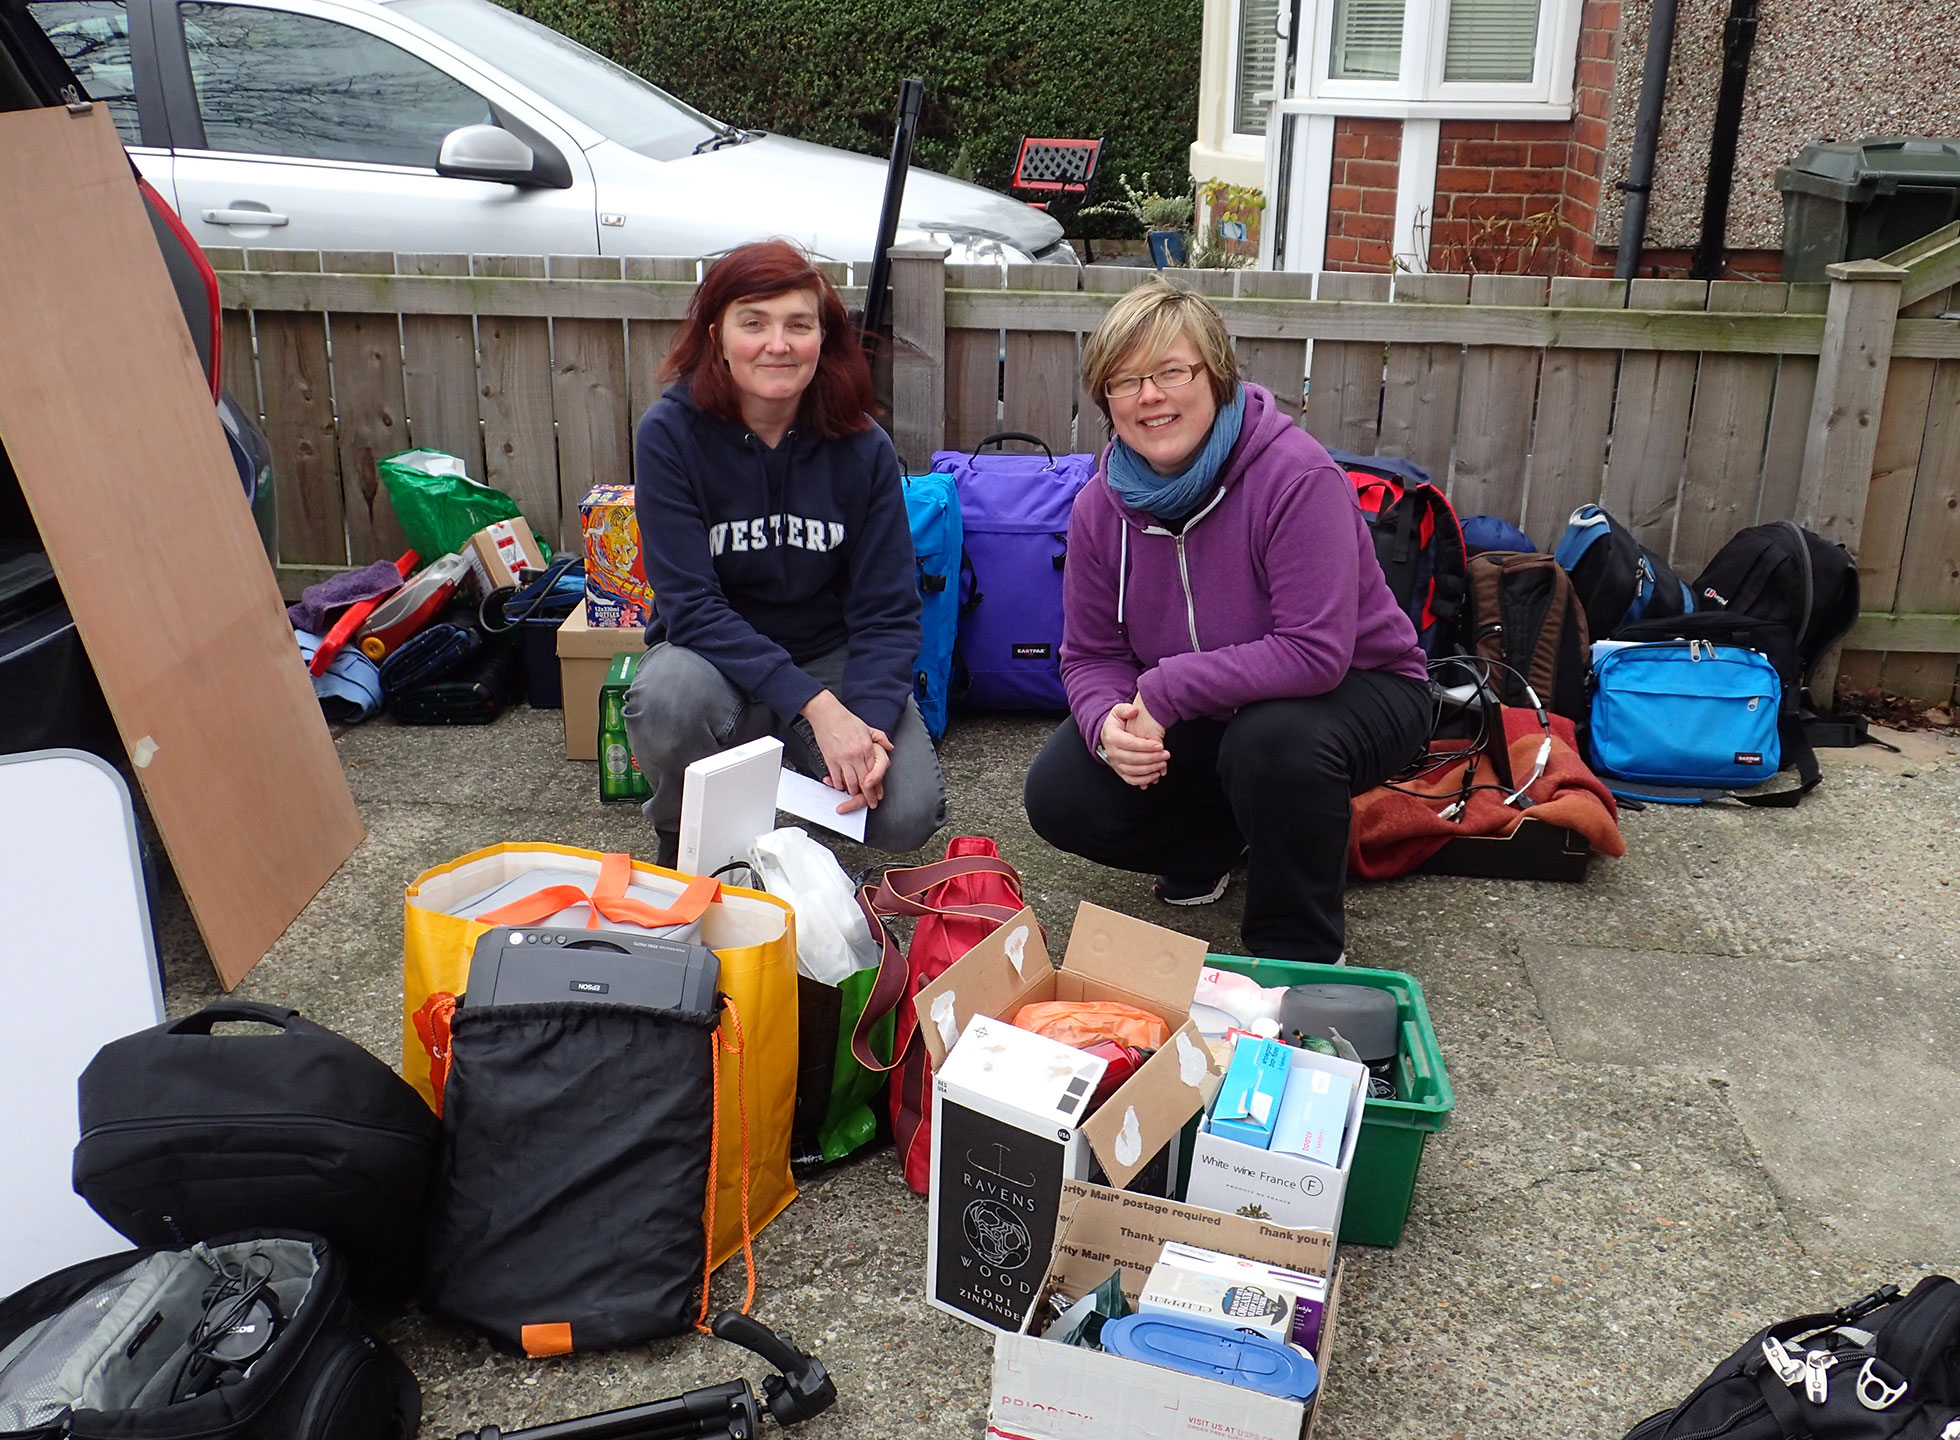 Mel and Lisa packing the car for Beadnell